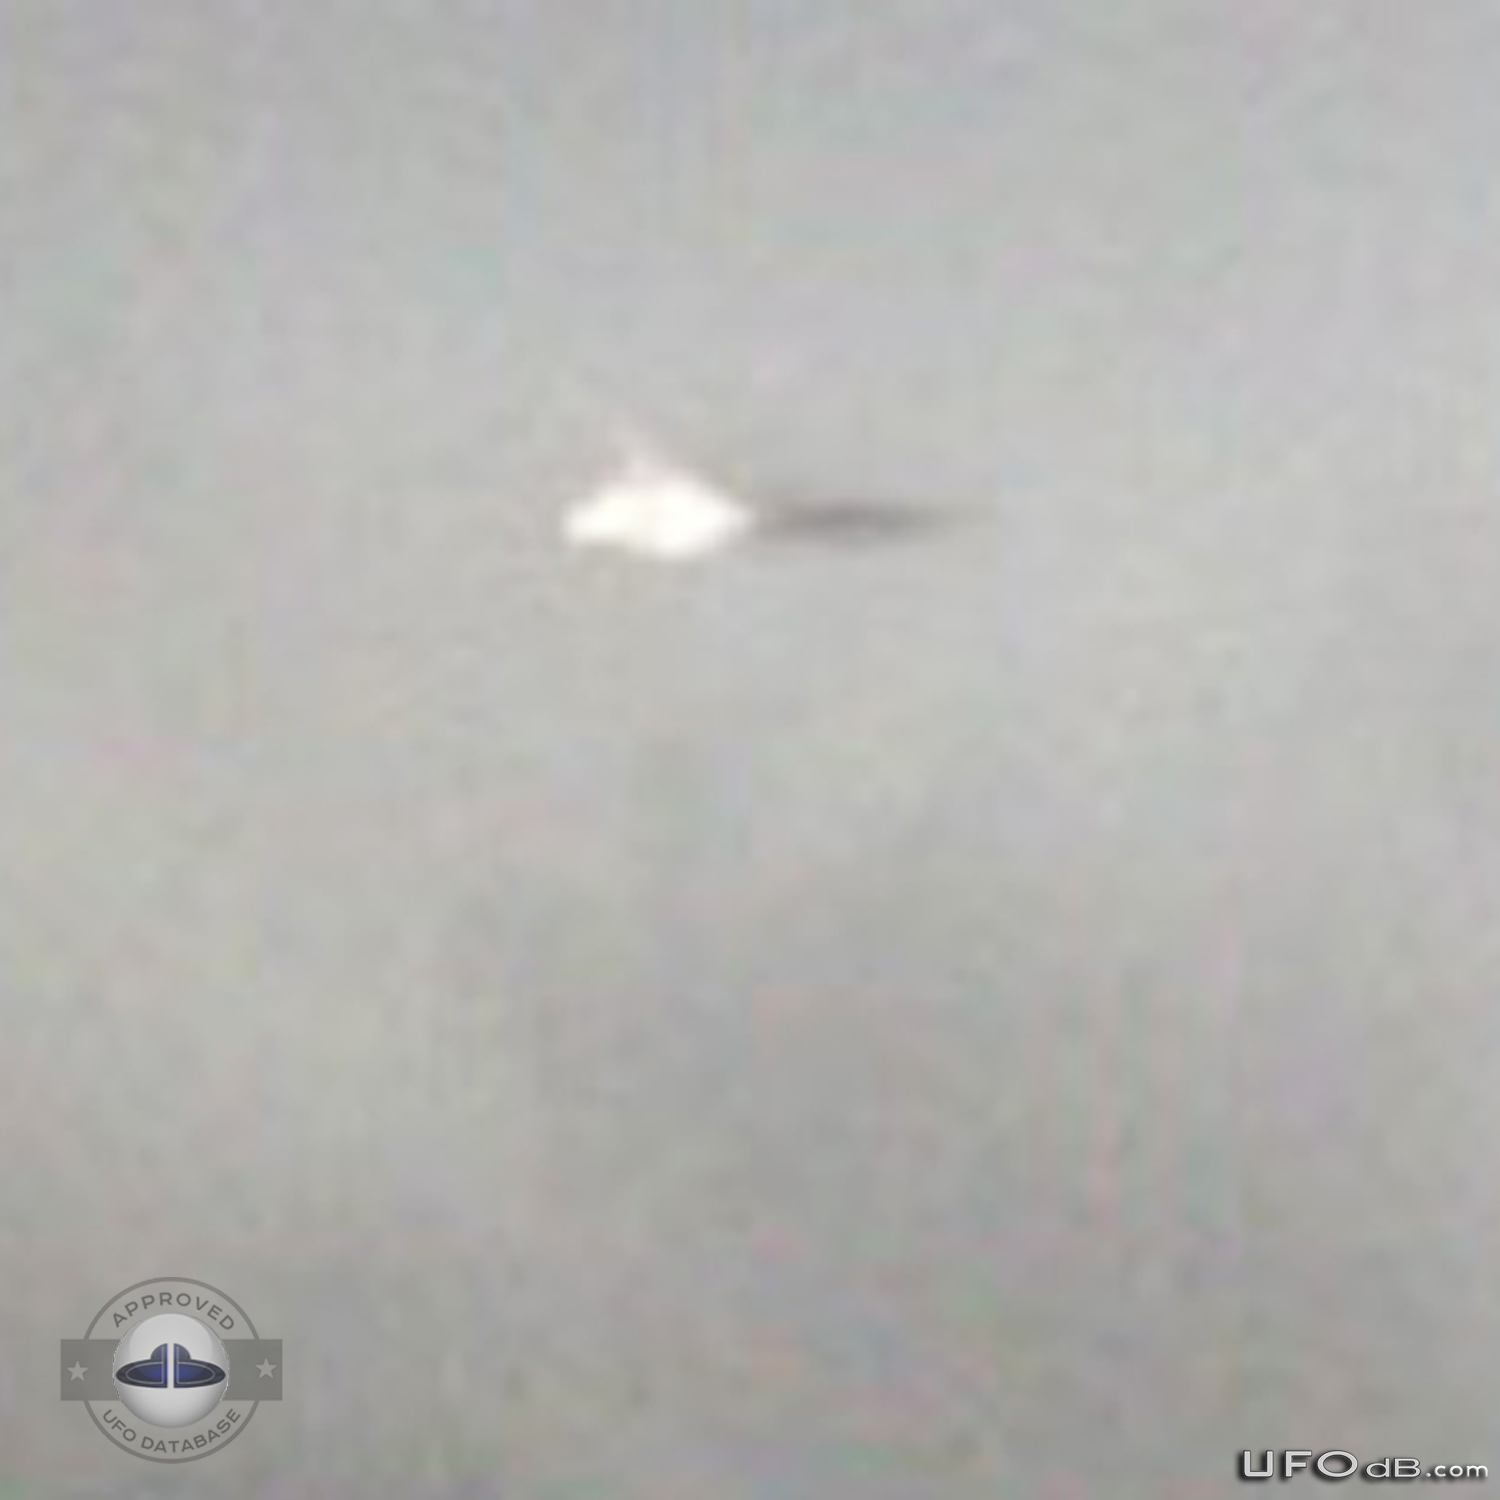 Rosario City Web Site display a UFO in stormy clouds | Argentina 2011 UFO Picture #259-3